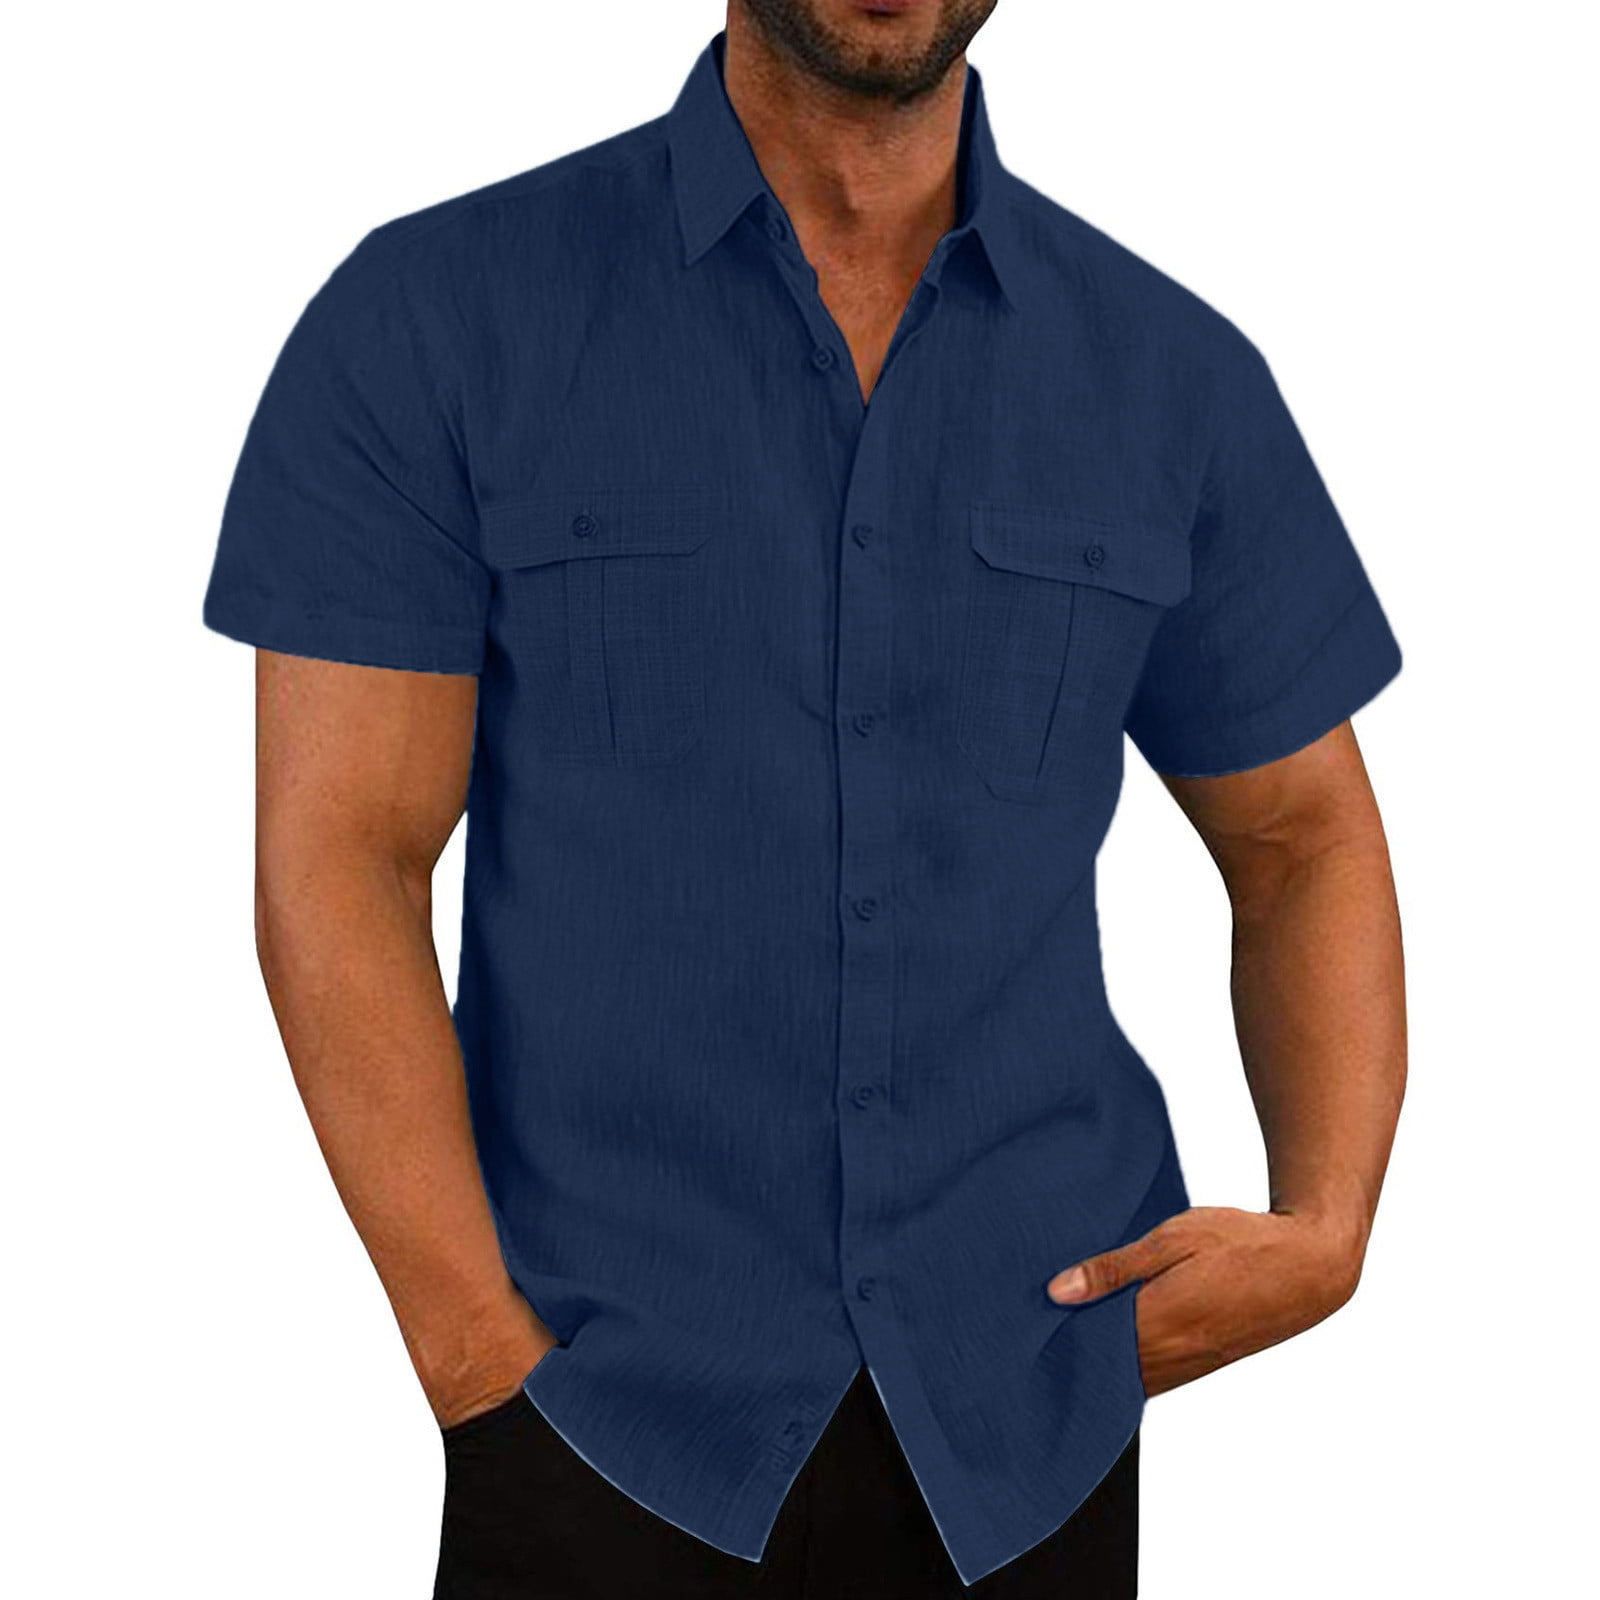 Fengqque Men's Short Sleeve Shirts Clearance Vacation Solid Color